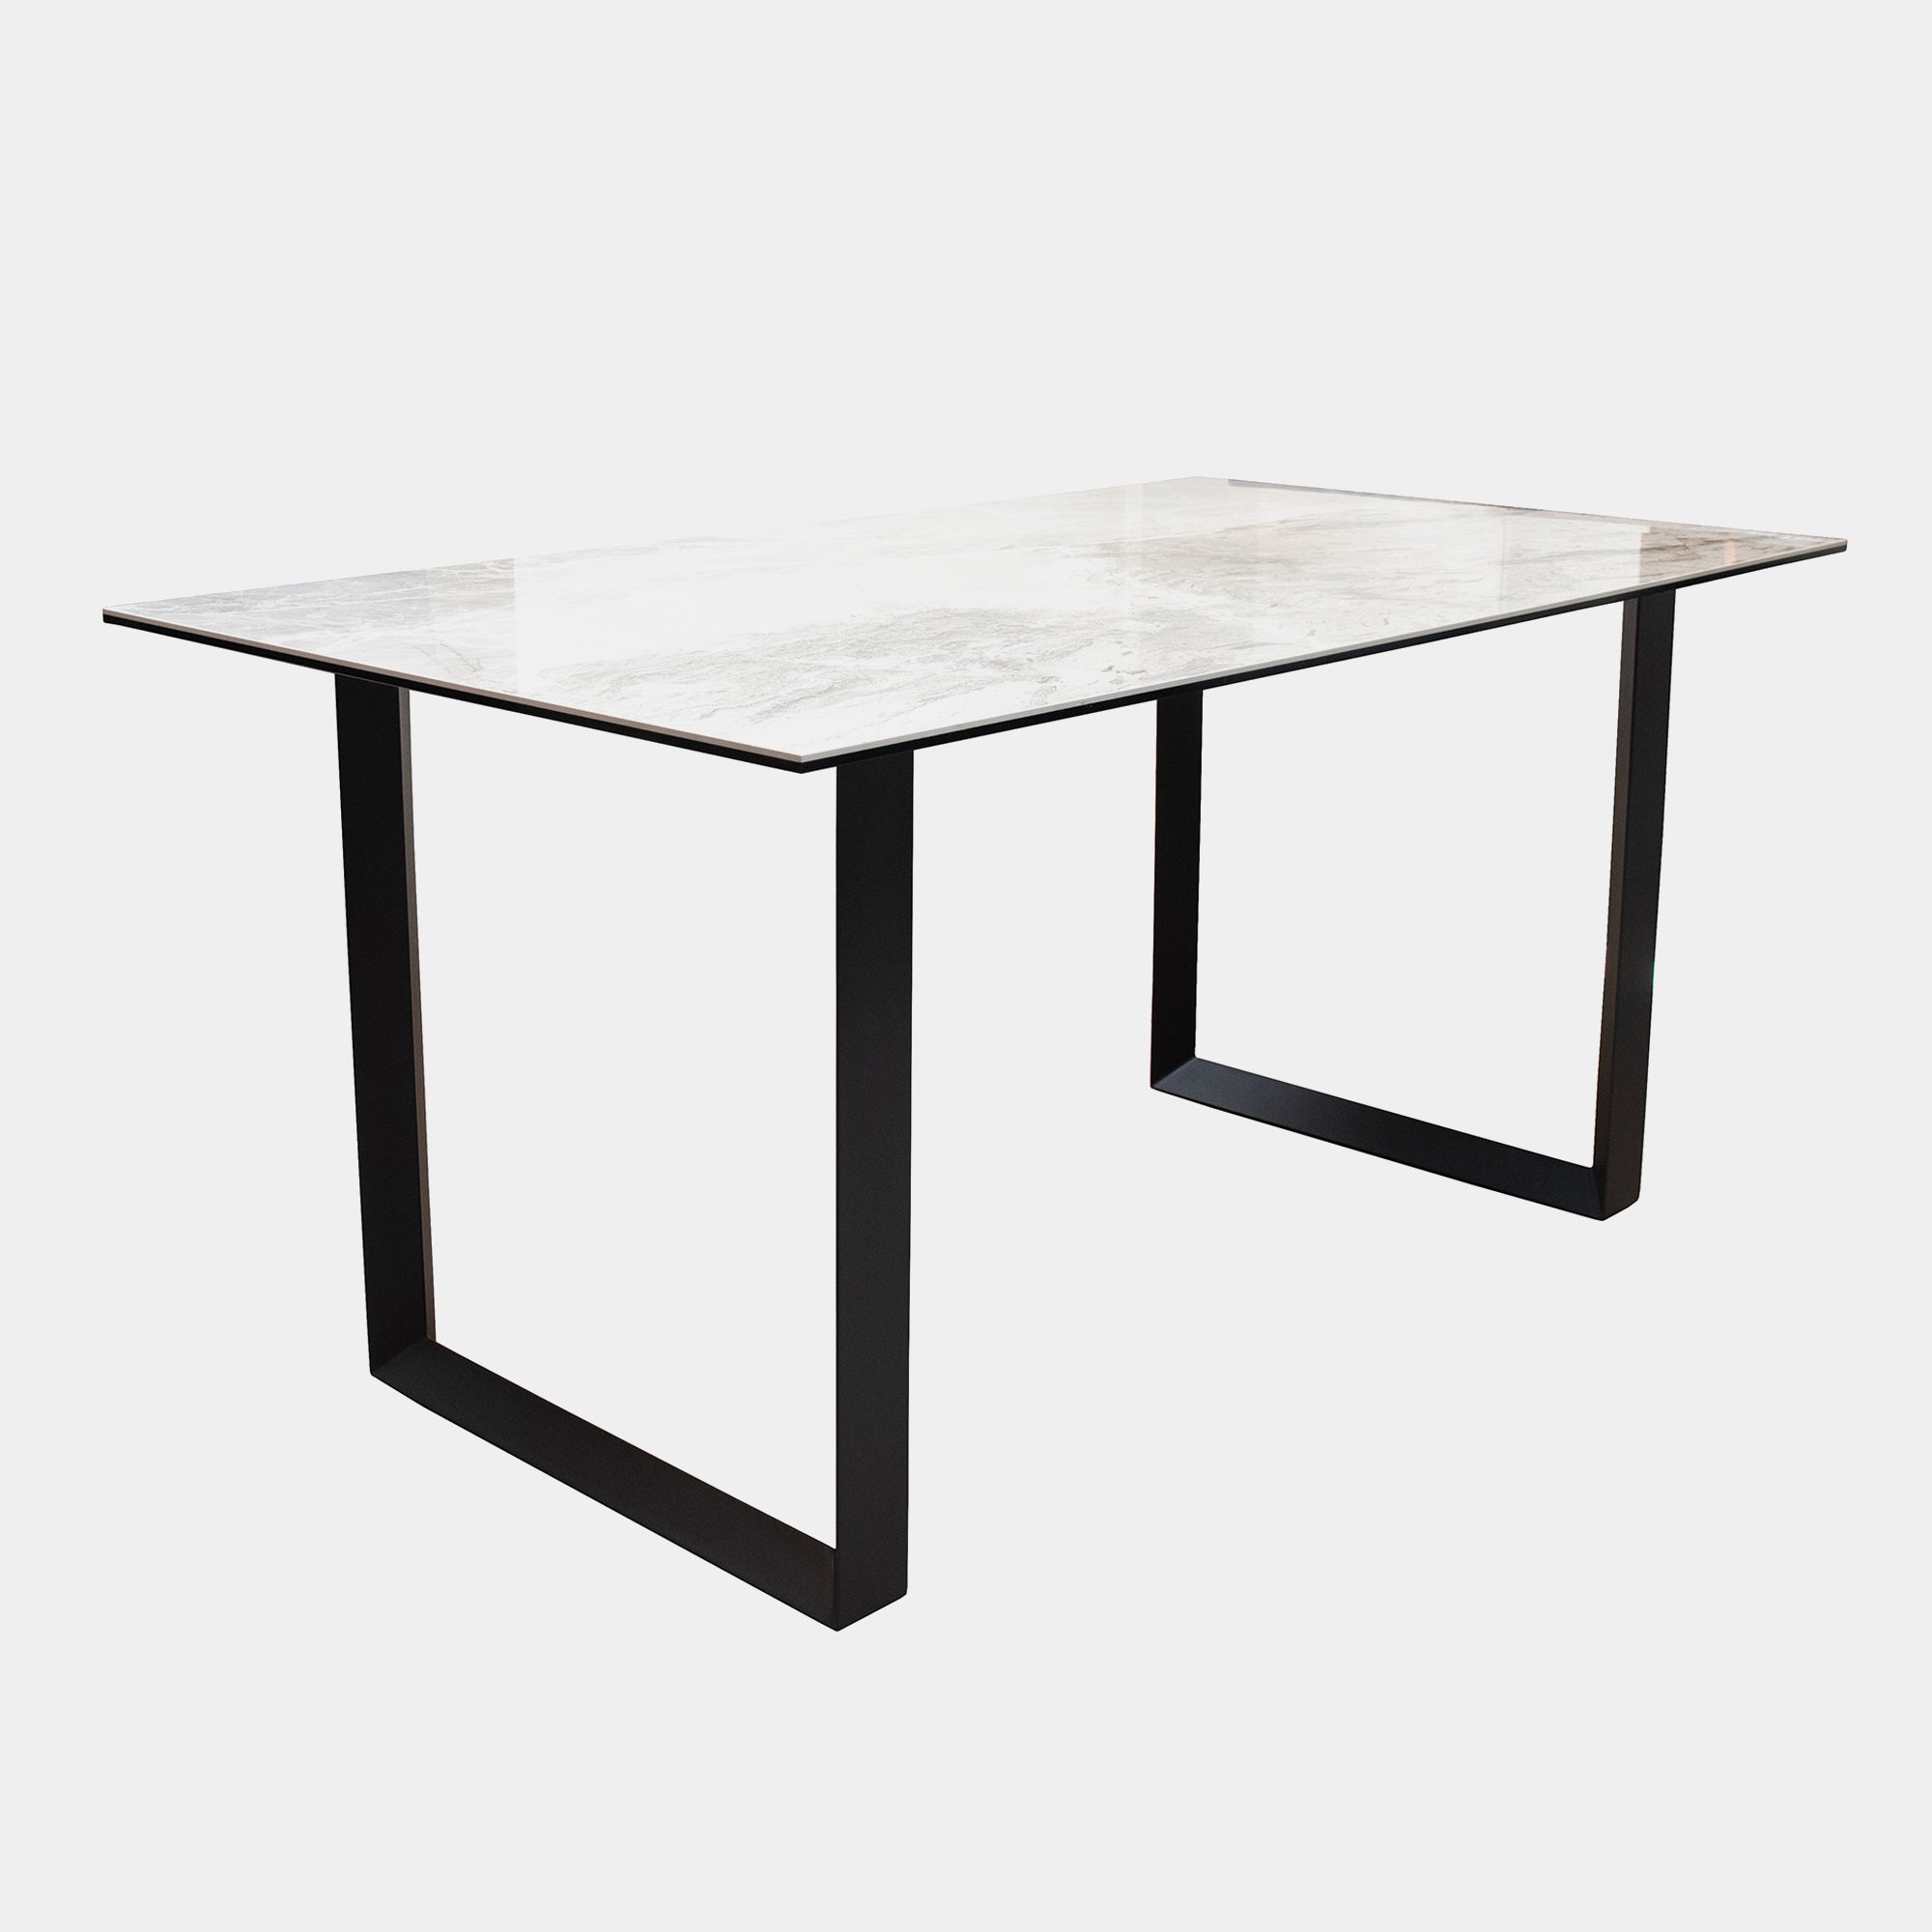 160cm Dining Table With C21 Ceramic Top Anthracite Frame